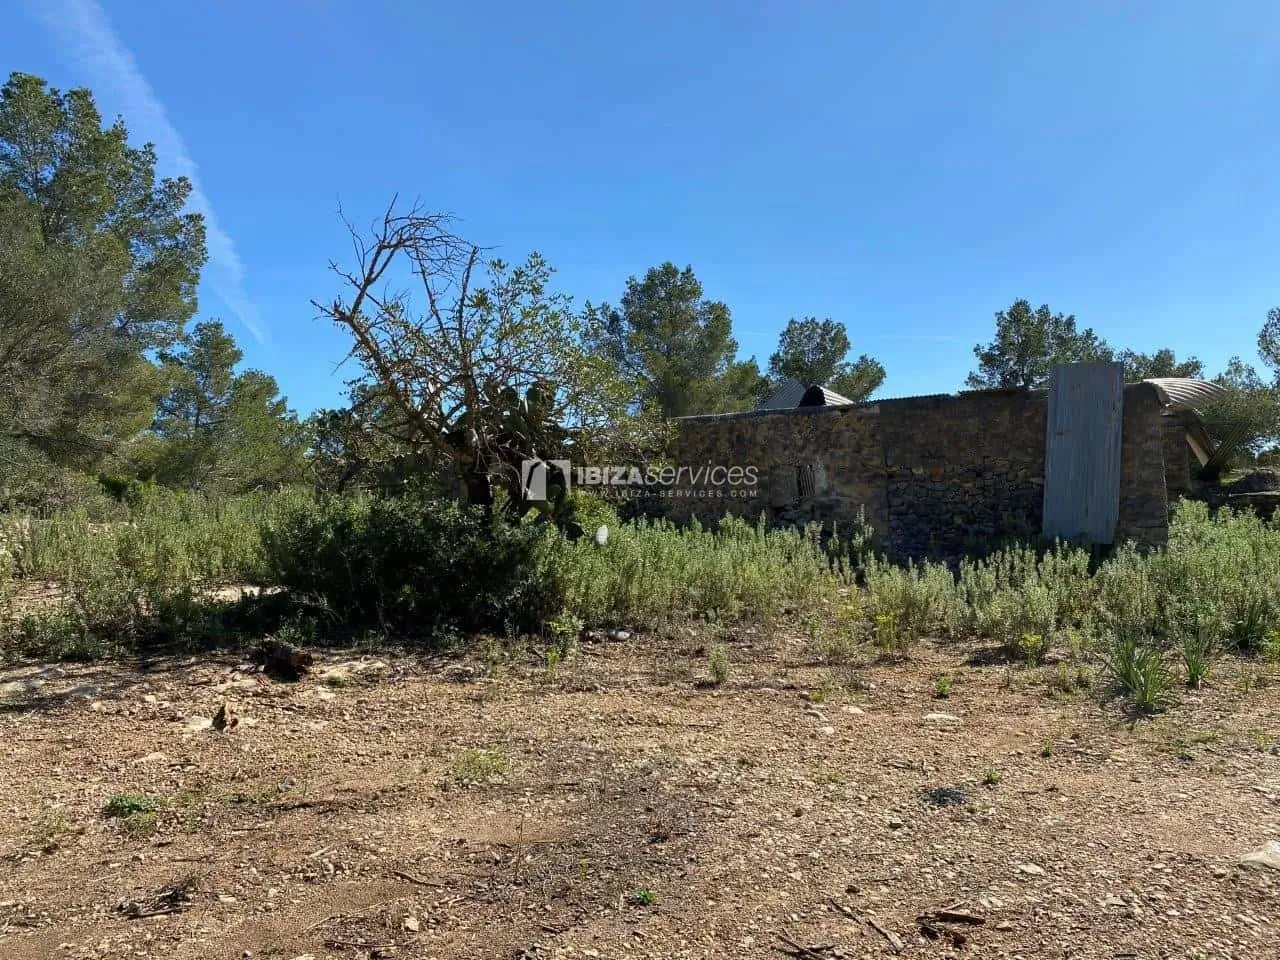 For sale finca to renovate with license on a plot of 537,000 sqm